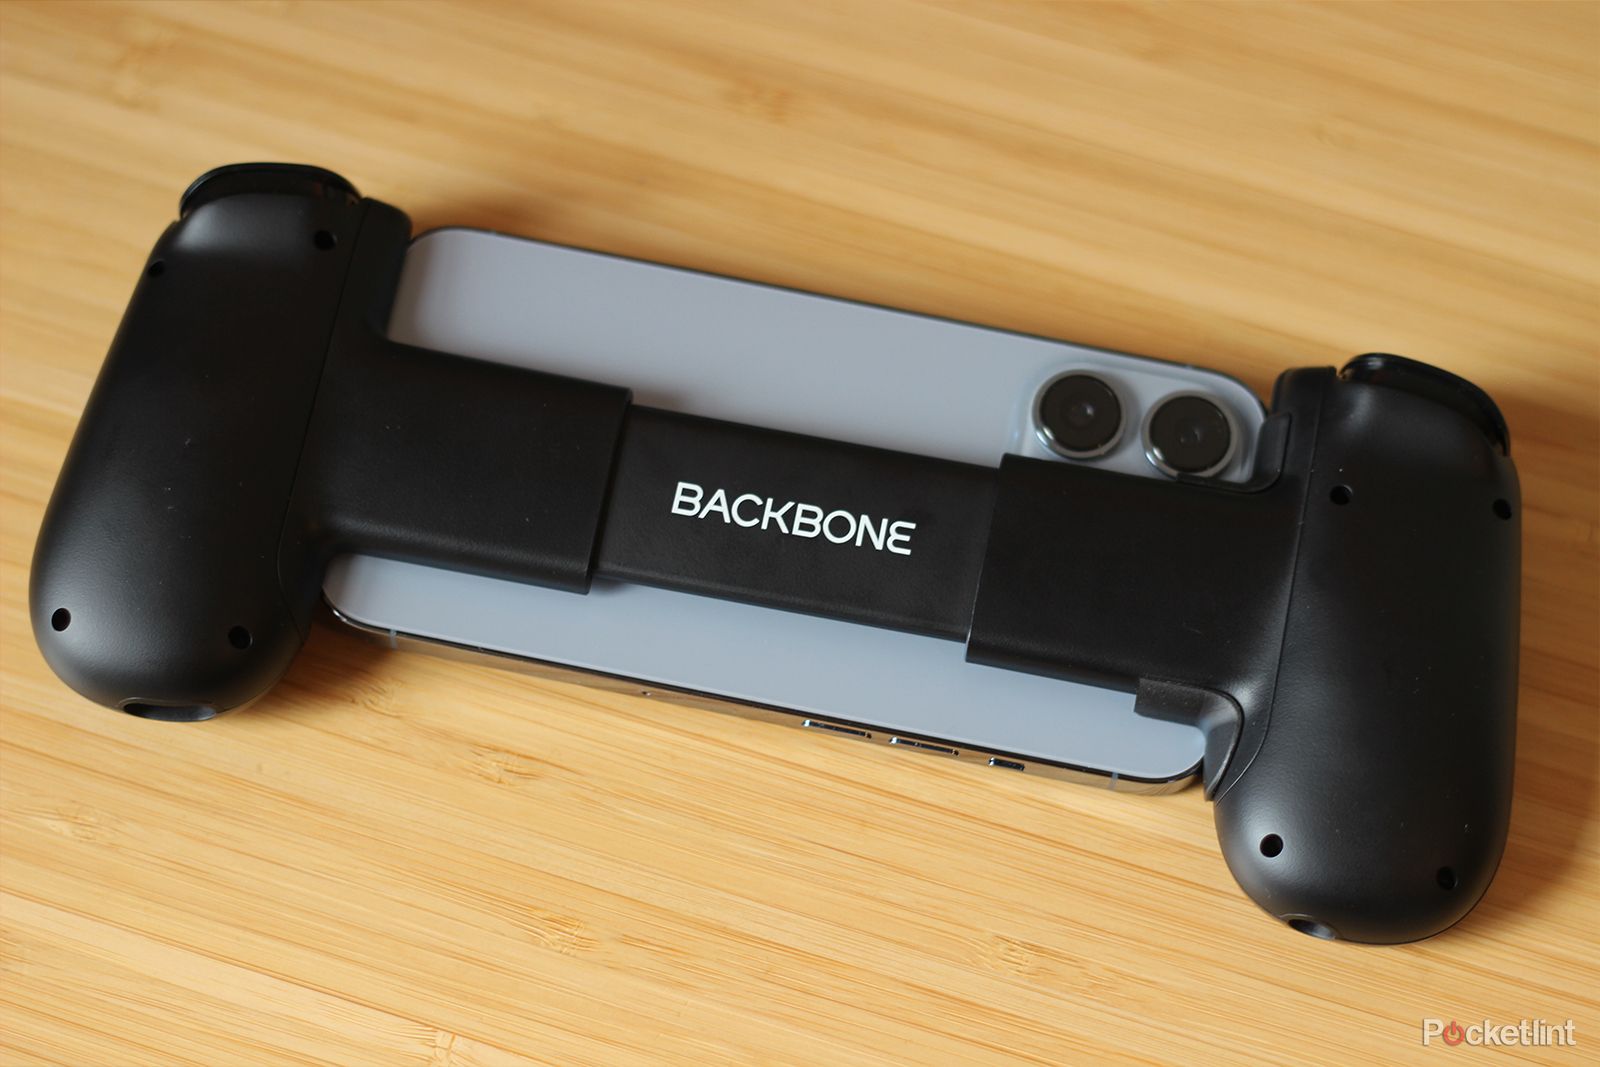 Backbone One Review - The BEST iPhone Gaming Controller! 